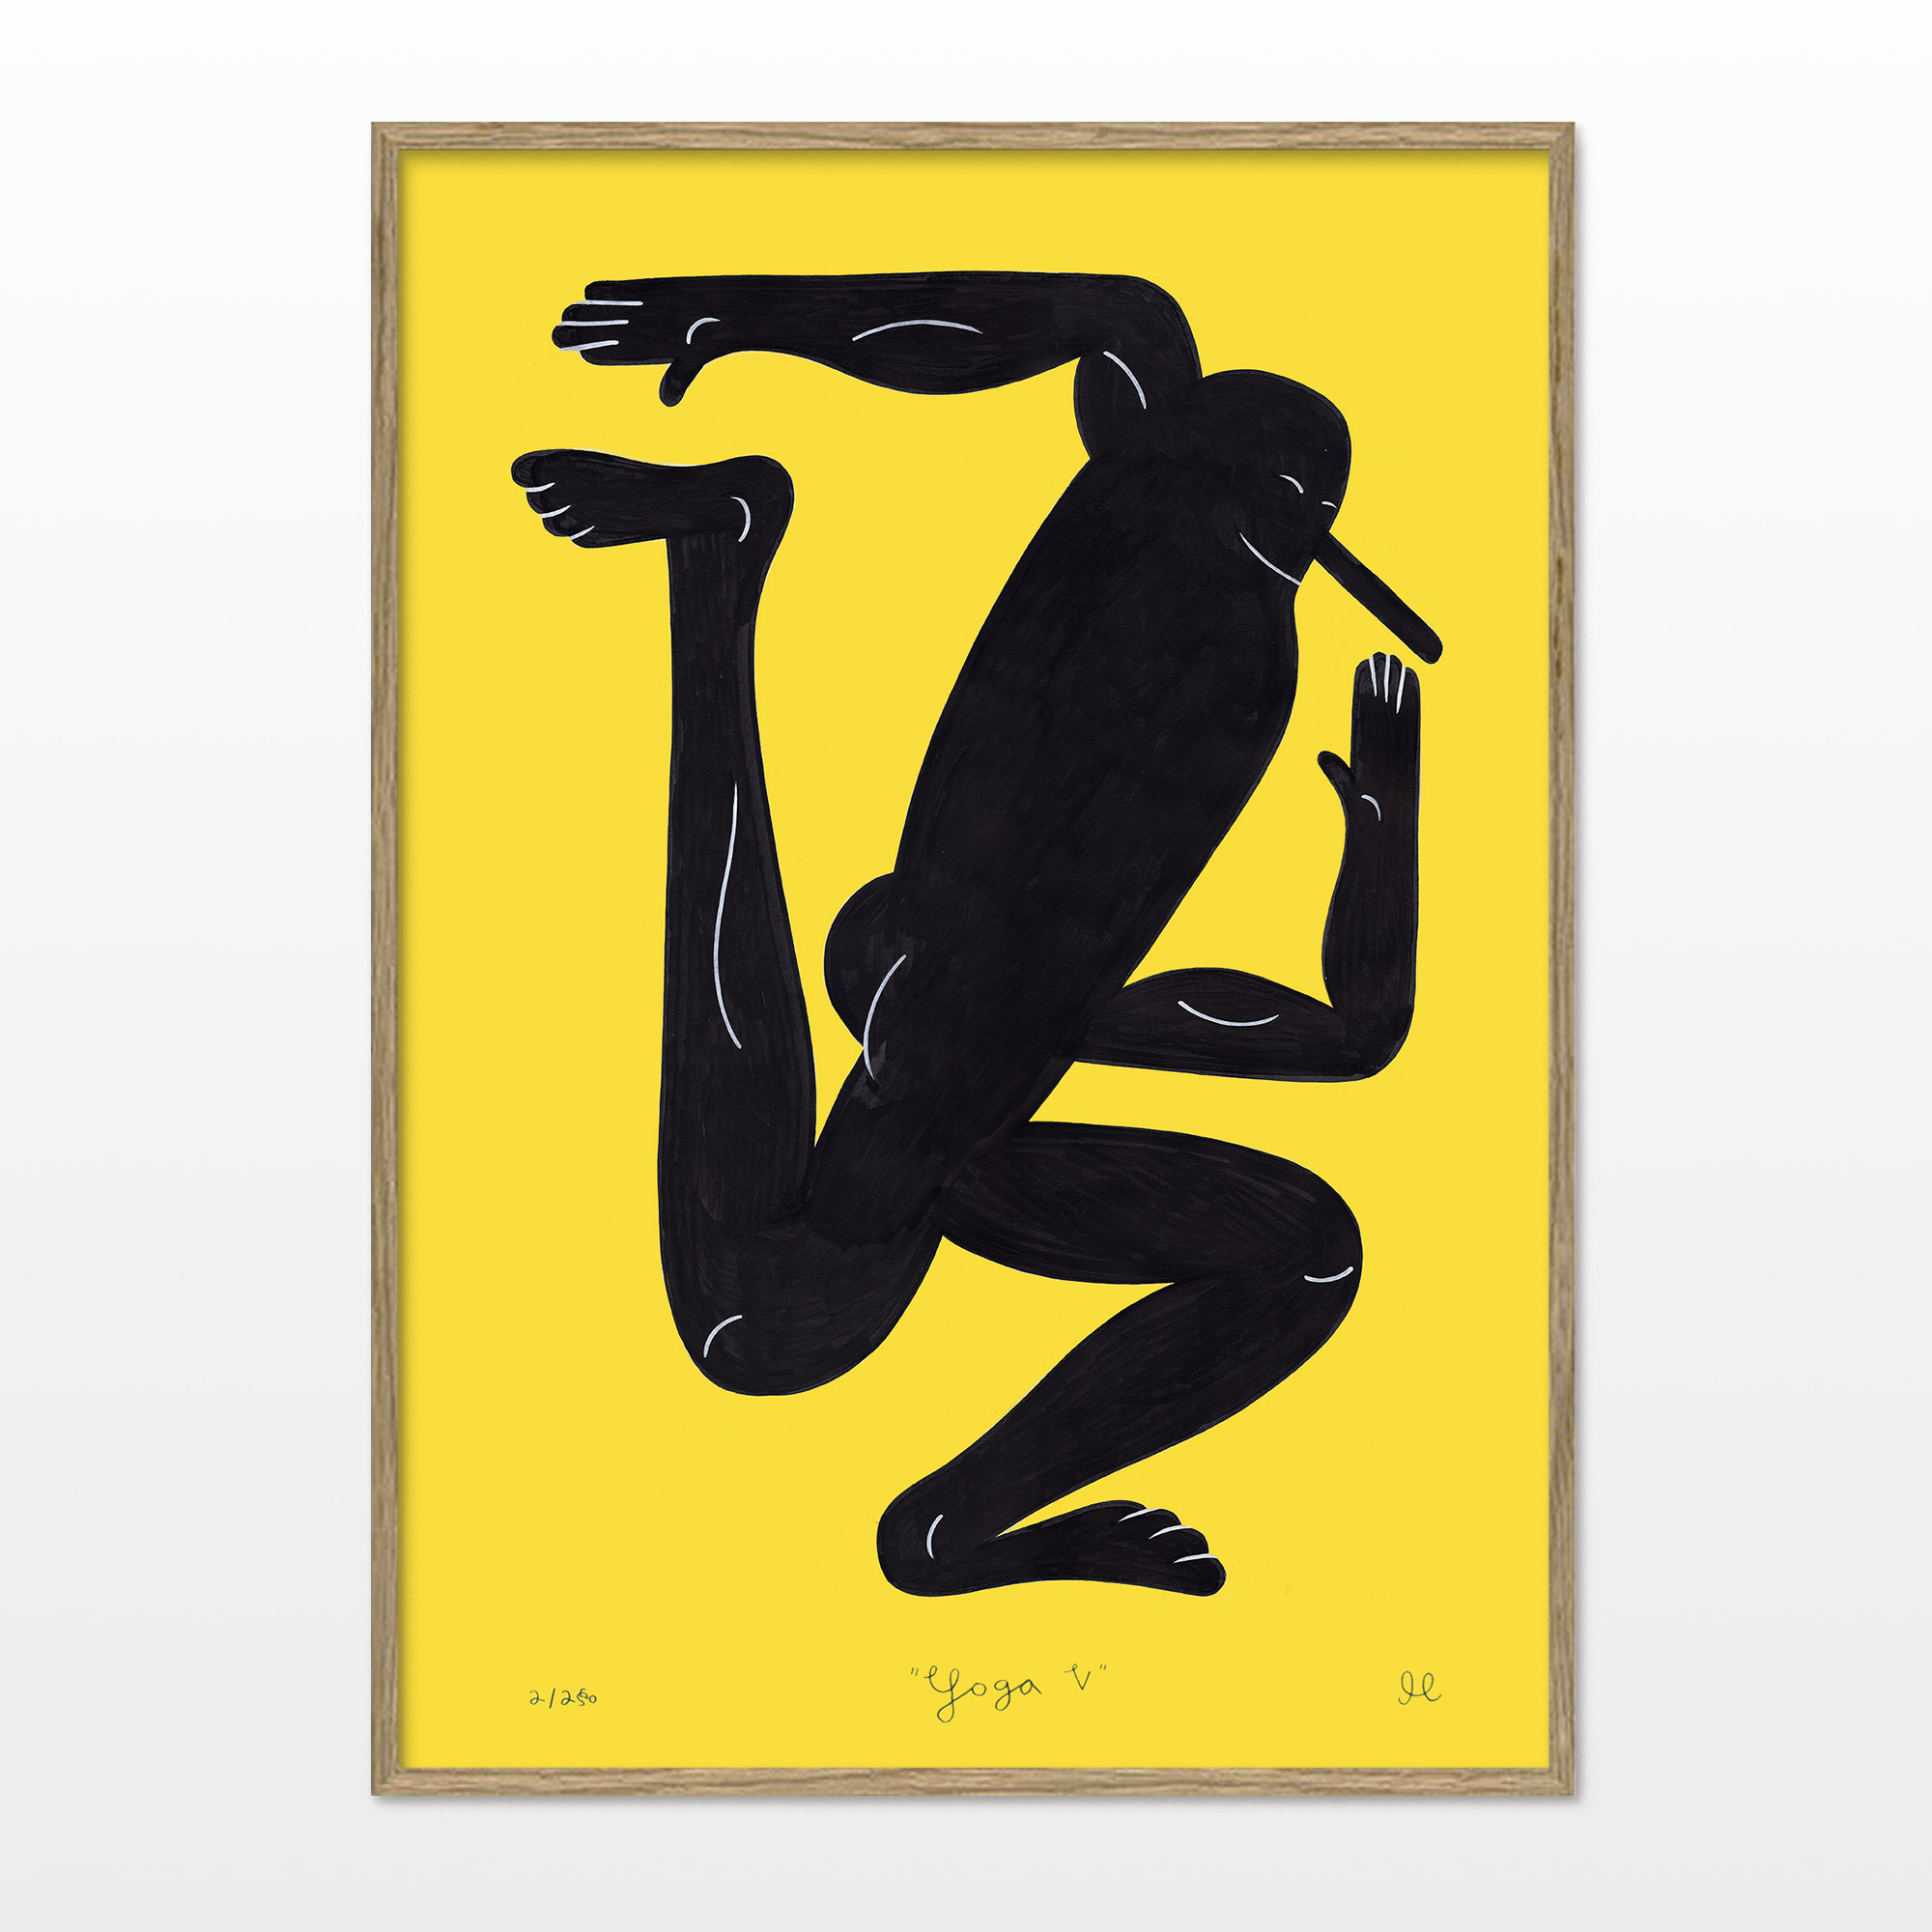 posters-prints, giclee-print, family-friendly, figurative, graphical, minimalistic, pop, bodies, cartoons, humor, movement, people, black, ink, paper, amusing, contemporary-art, copenhagen, danish, decorative, design, interior, interior-design, modern, nordic, posters, prints, scandinavien, Buy original high quality art. Paintings, drawings, limited edition prints & posters by talented artists.